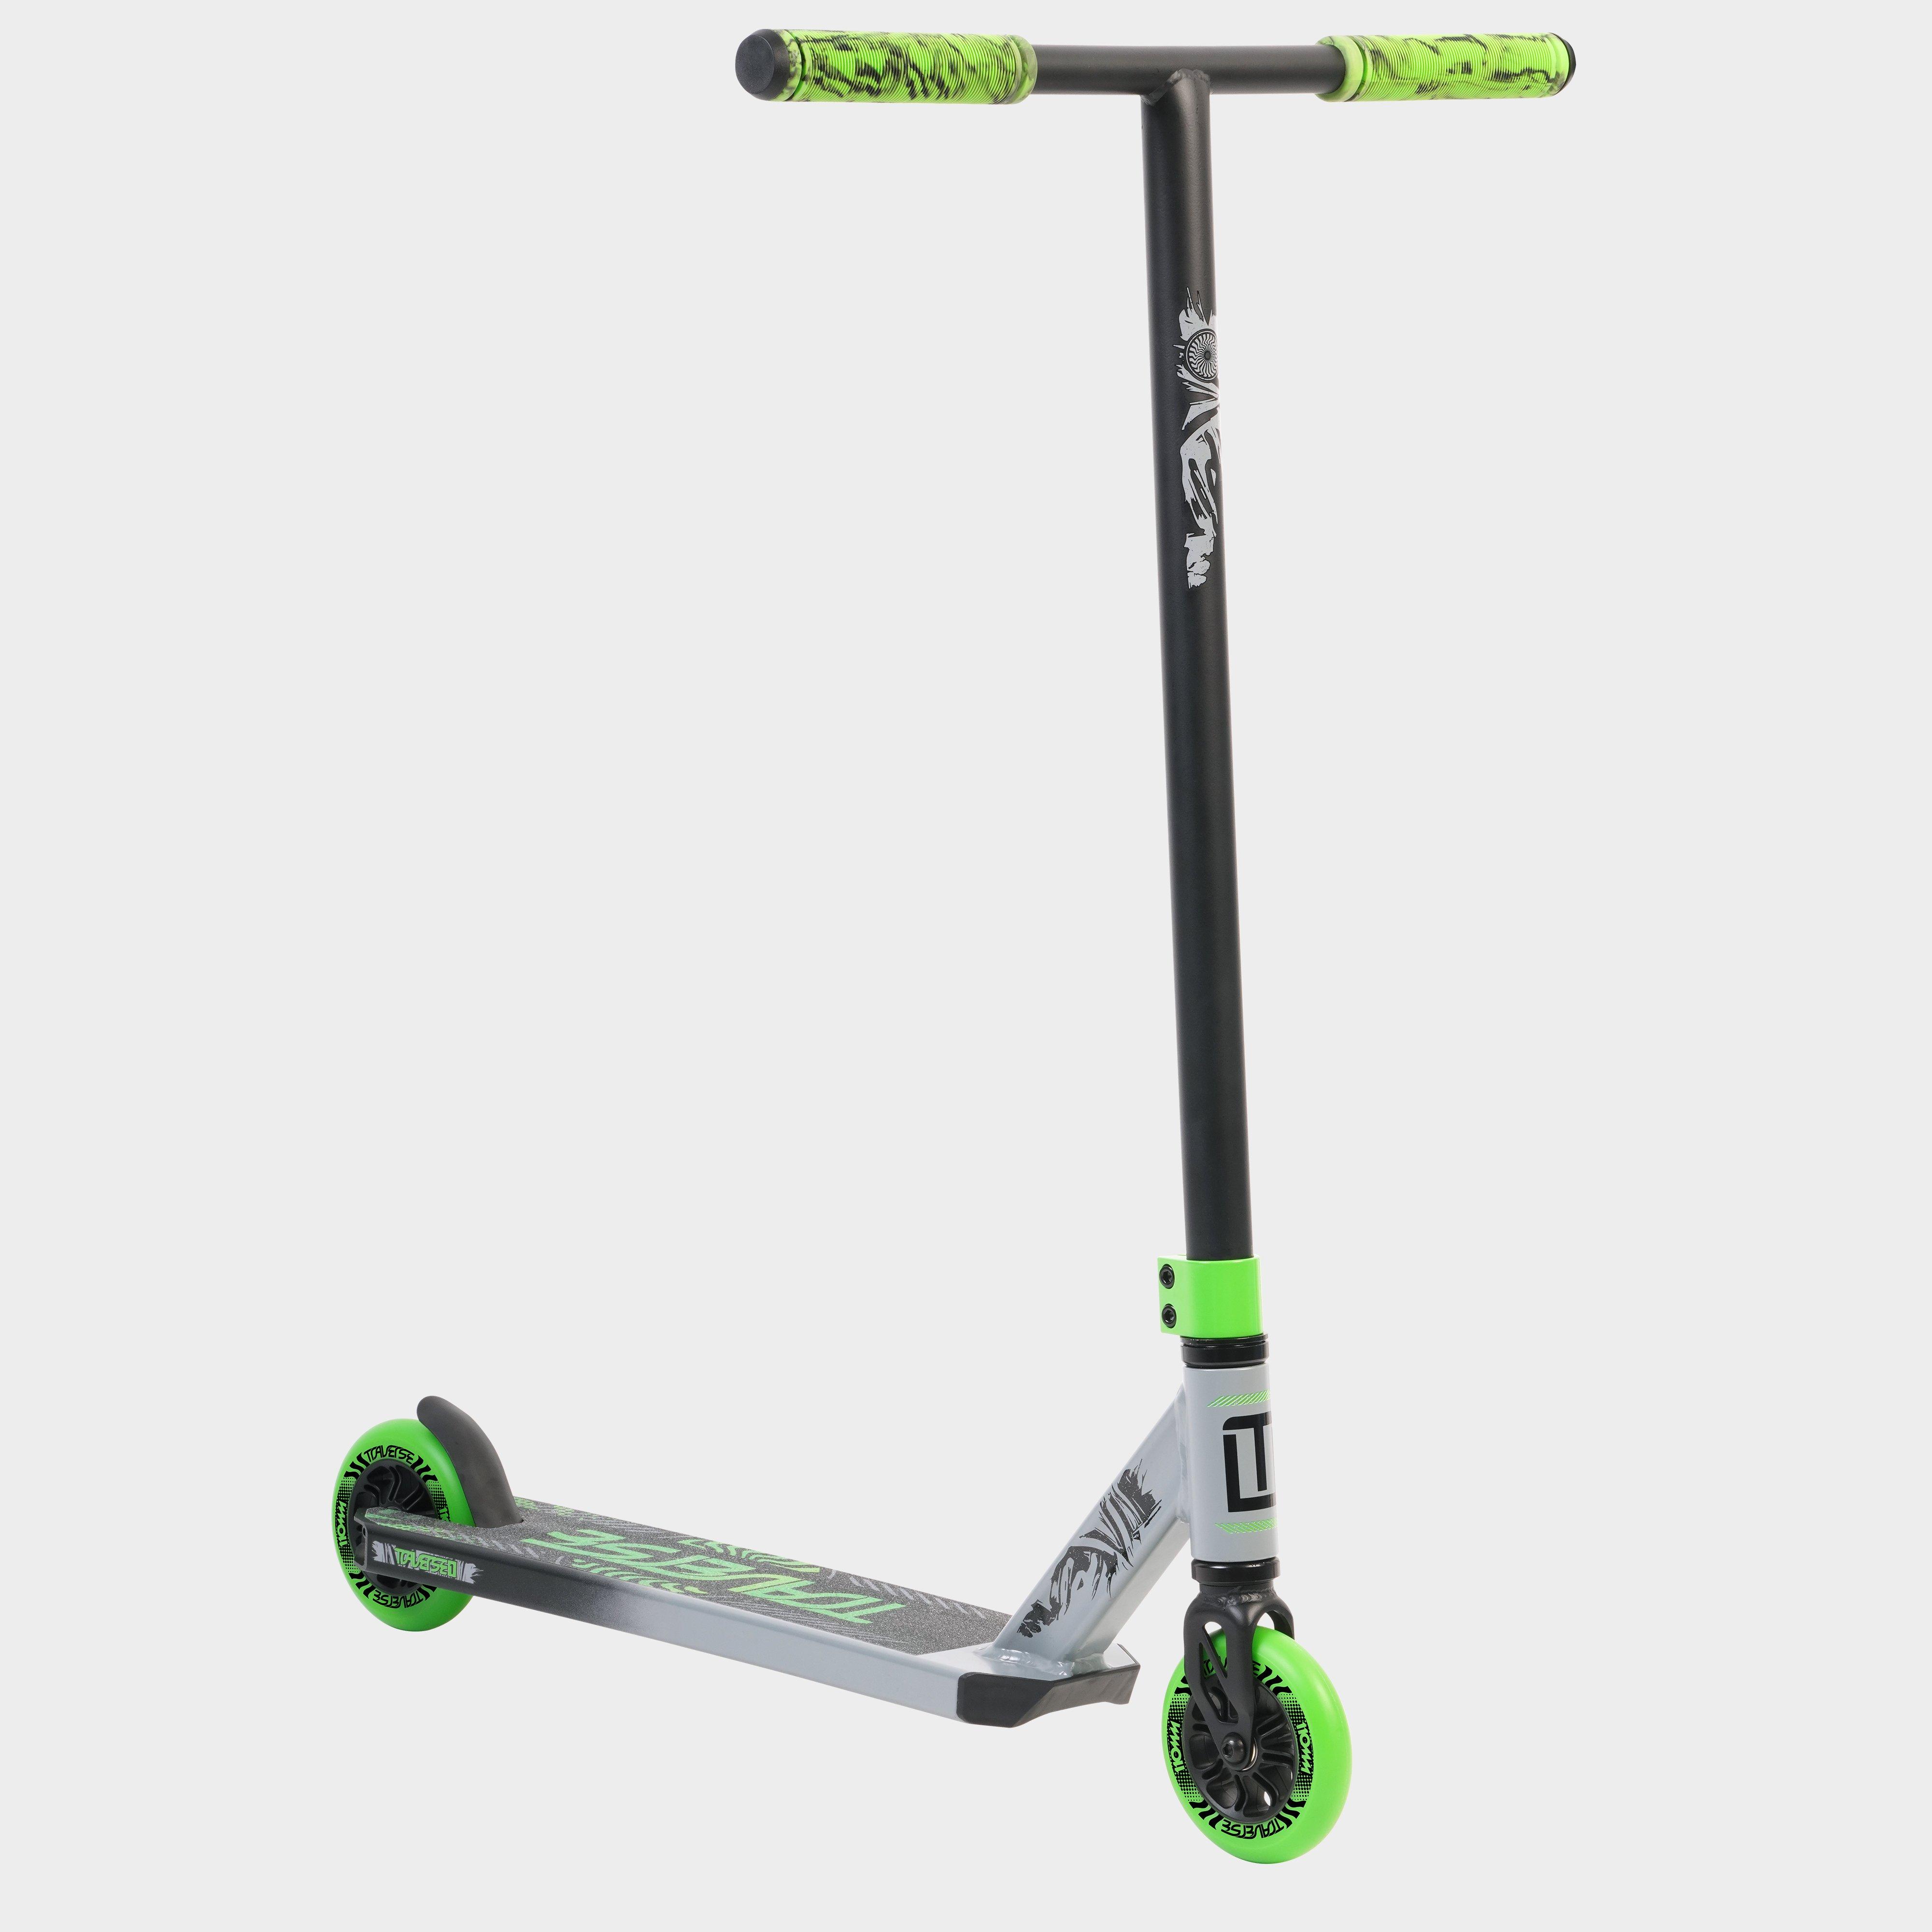 Traverse Lv1 Stunt Scooter - Green/silver  Green/silver